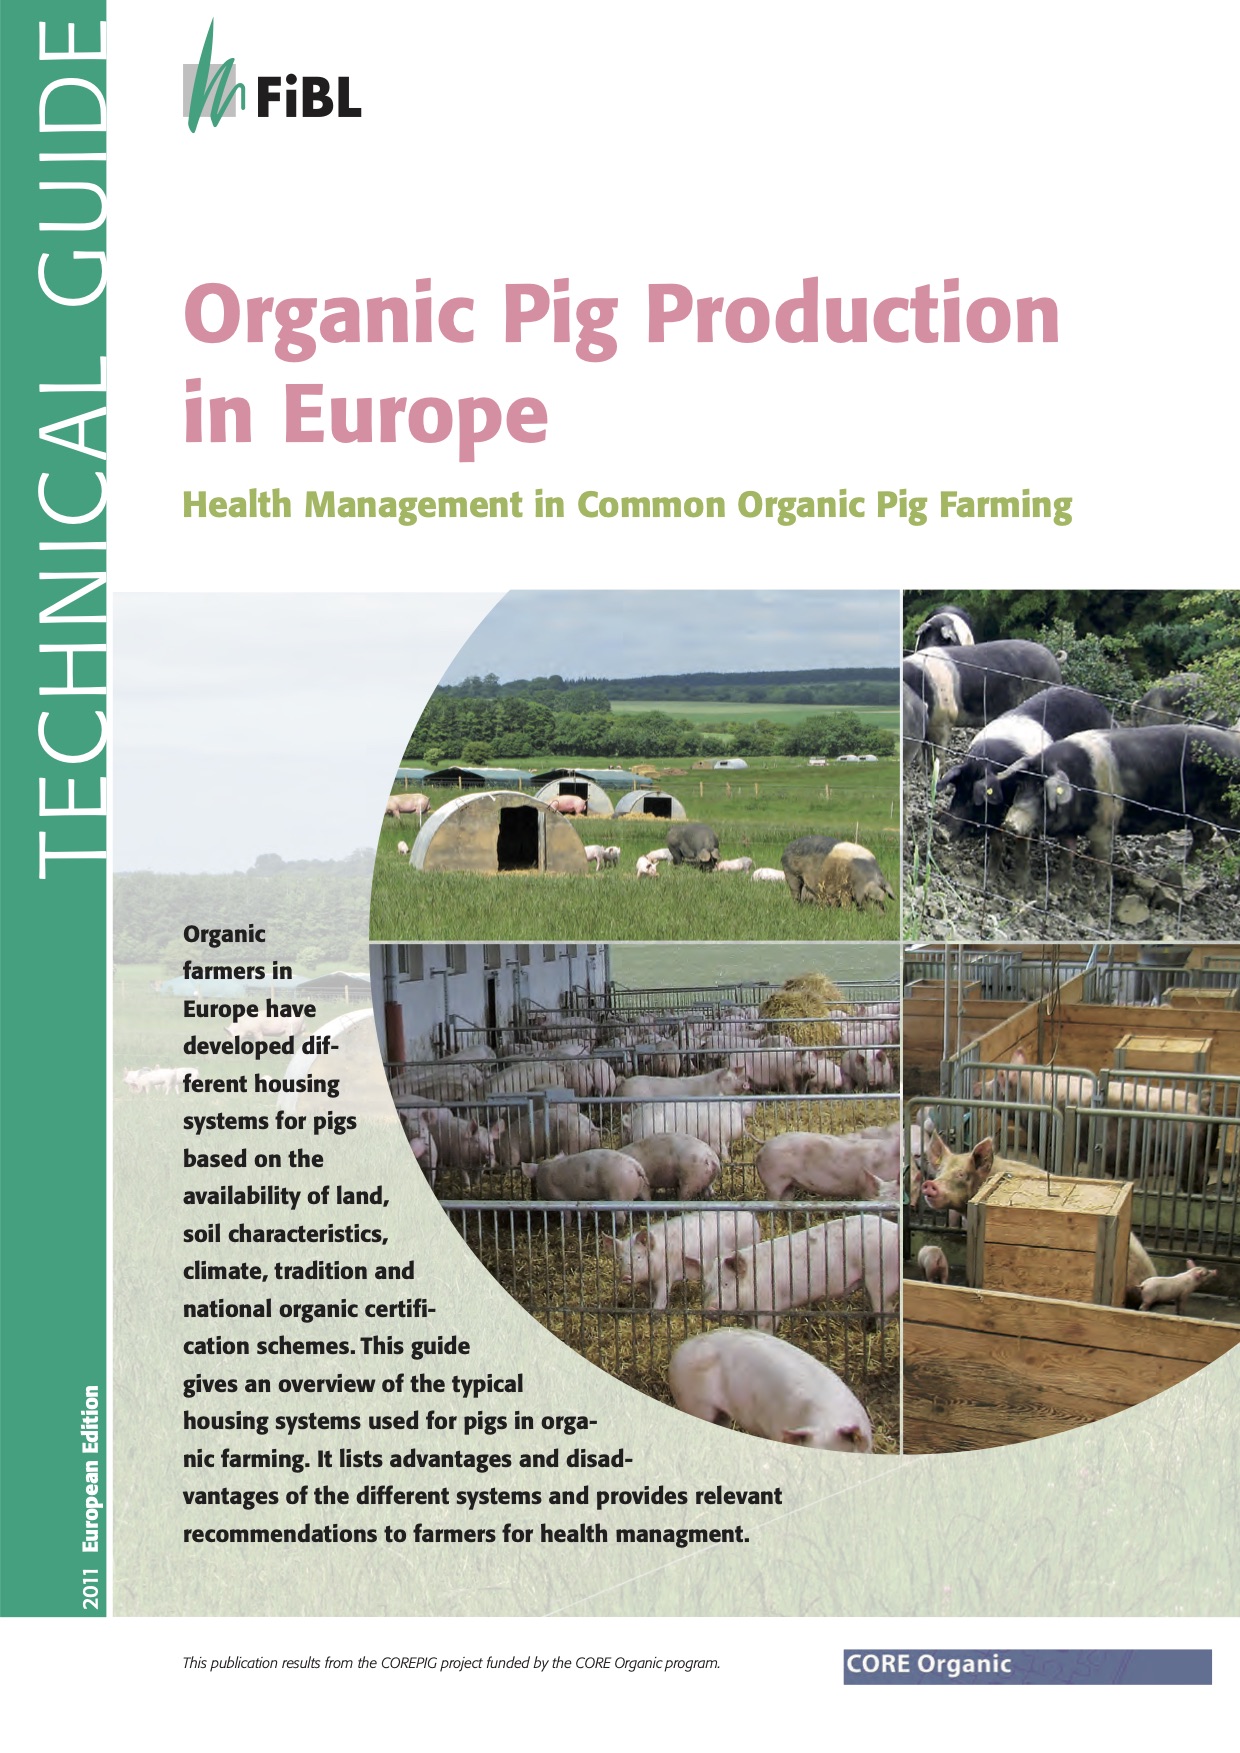 Organic pig production in Europe: health management in common organic pig farming